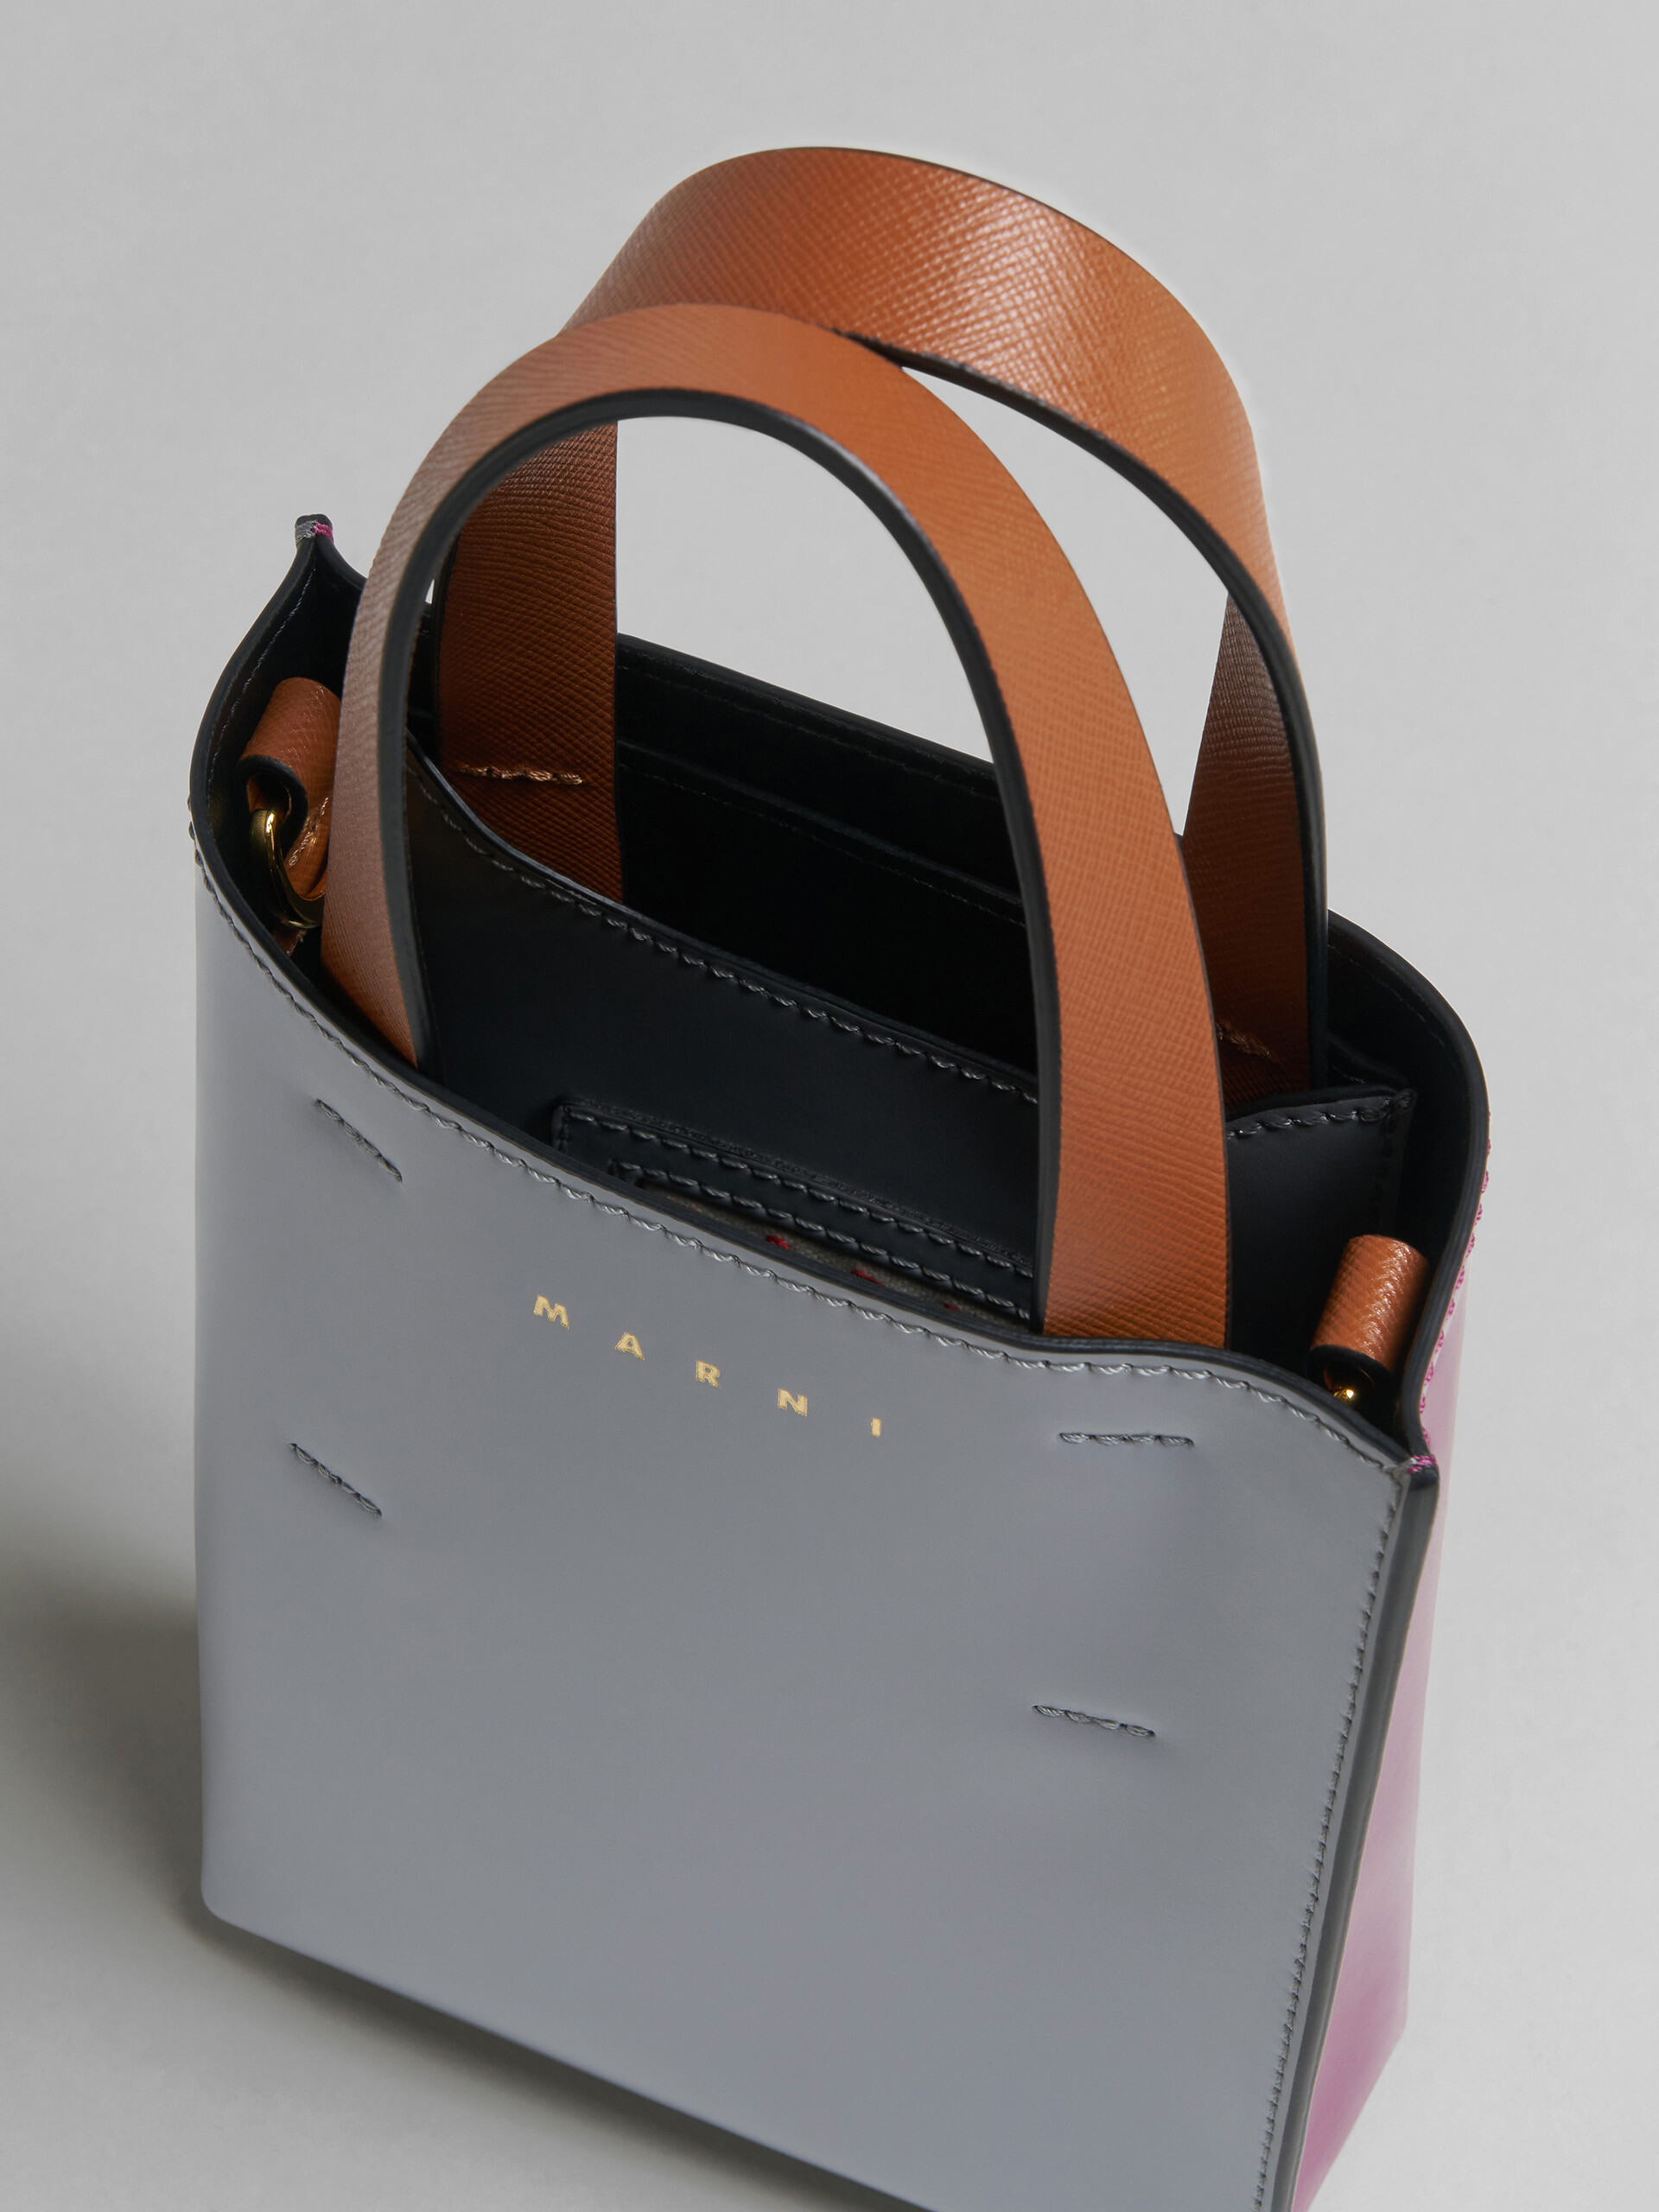 MUSEO nano bag in grey and purple leather - Shopping Bags - Image 4